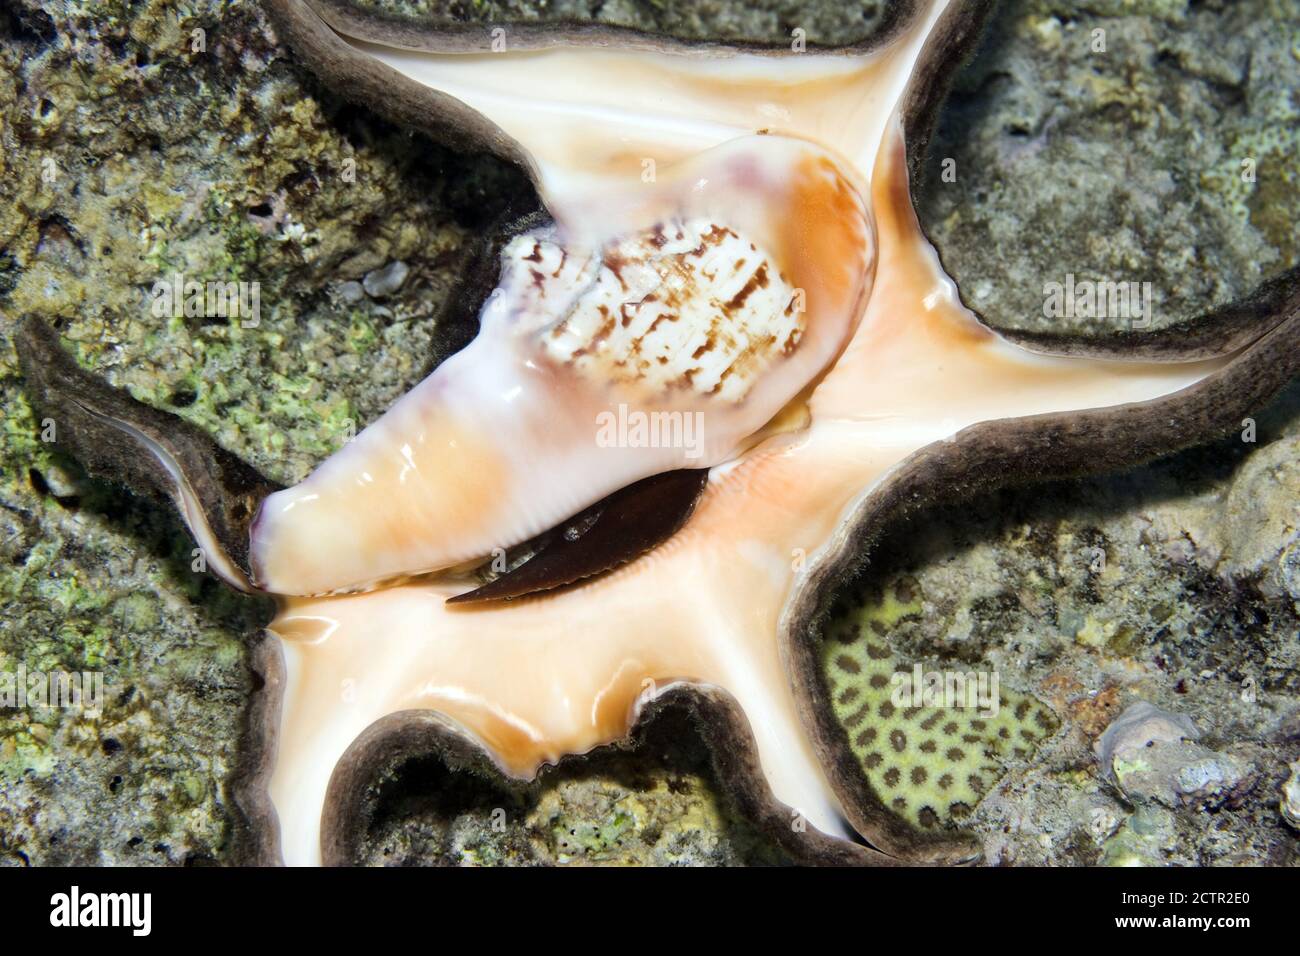 Common Spider Conch Shell: Lambis Lambis, are beautiful and found in the Indian Ocean and the South Pacific Ocean. The Conch lives inside the shell. Stock Photo